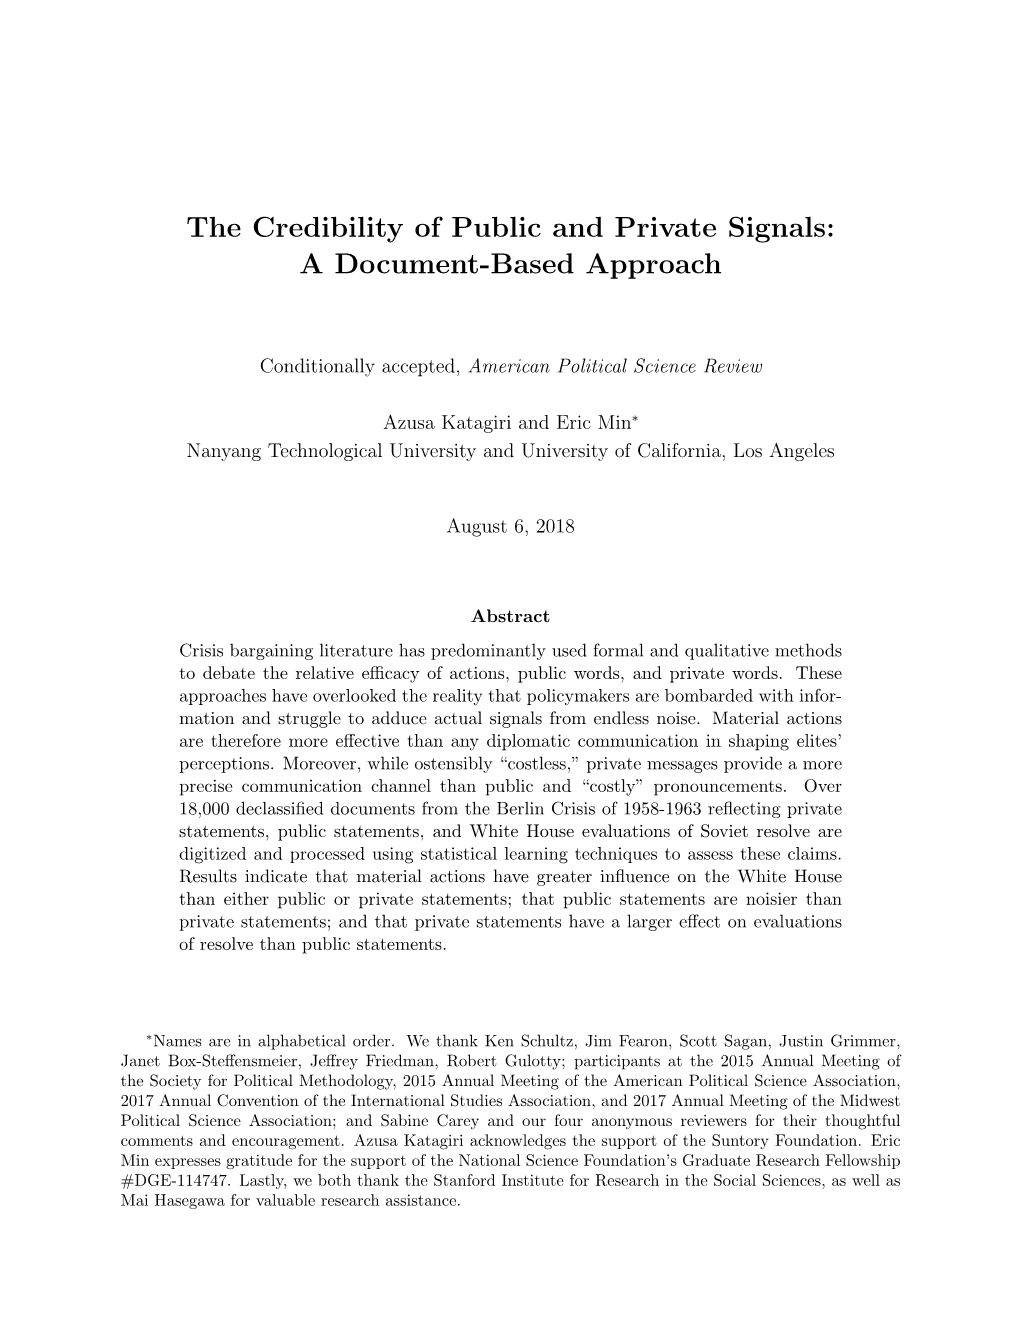 The Credibility of Public and Private Signals: a Document-Based Approach